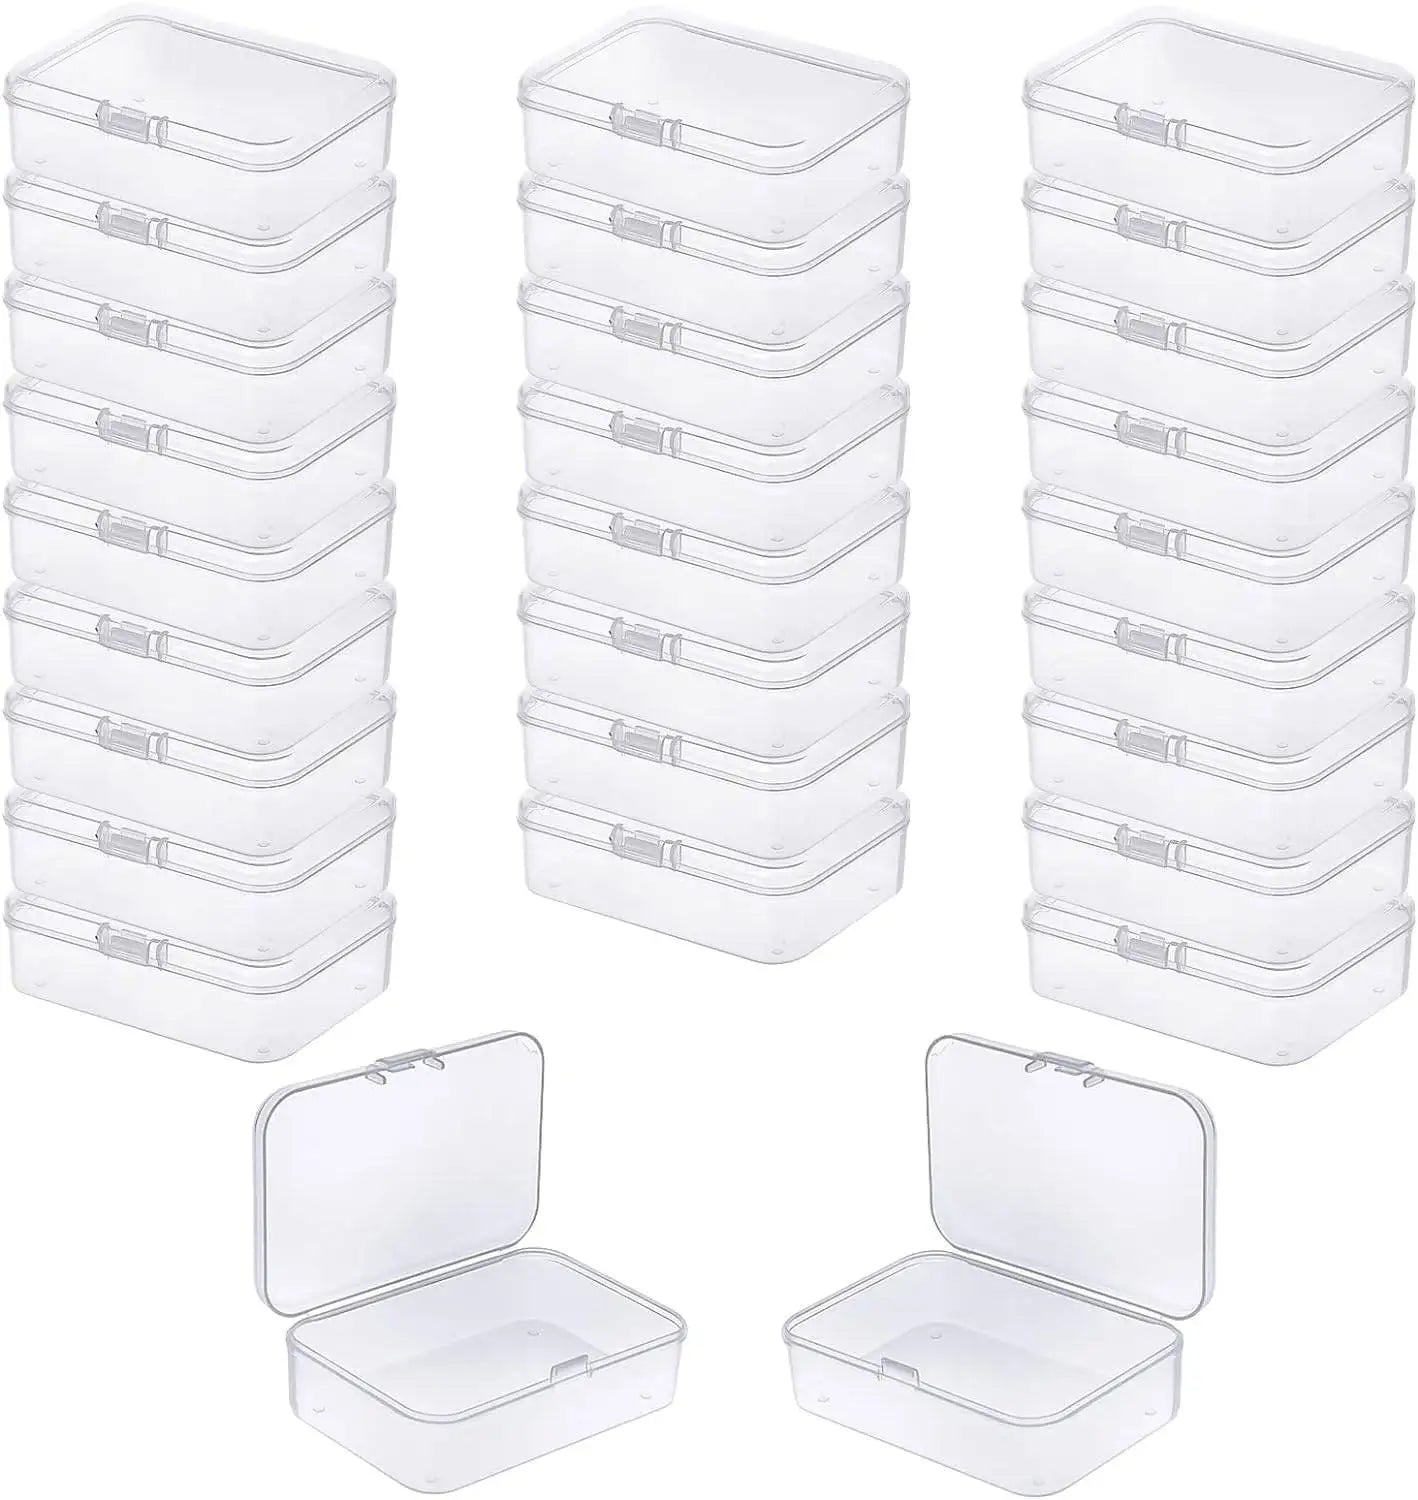 6pcs Rectangular Empty Mini Clear Plastic Organizer Storage Box Containers with Hinged Lid for Small Item Craft Jewelry Hardware